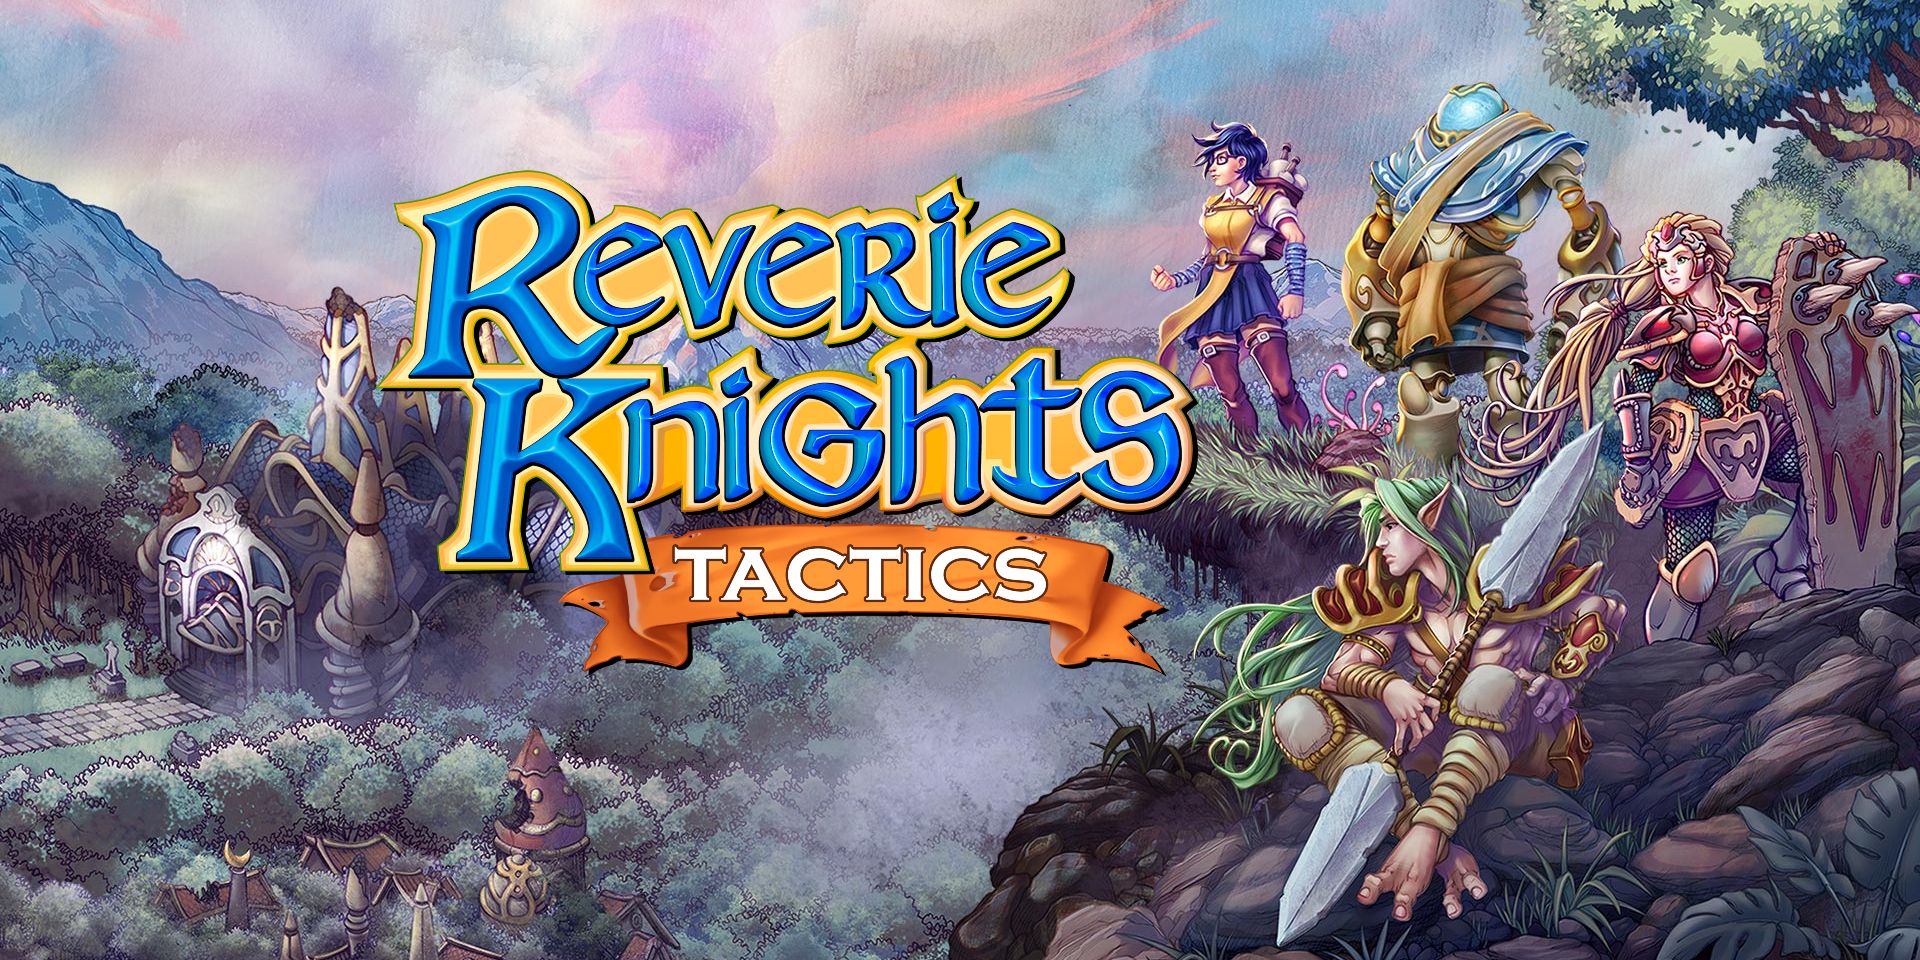 reverie knights tactics guide